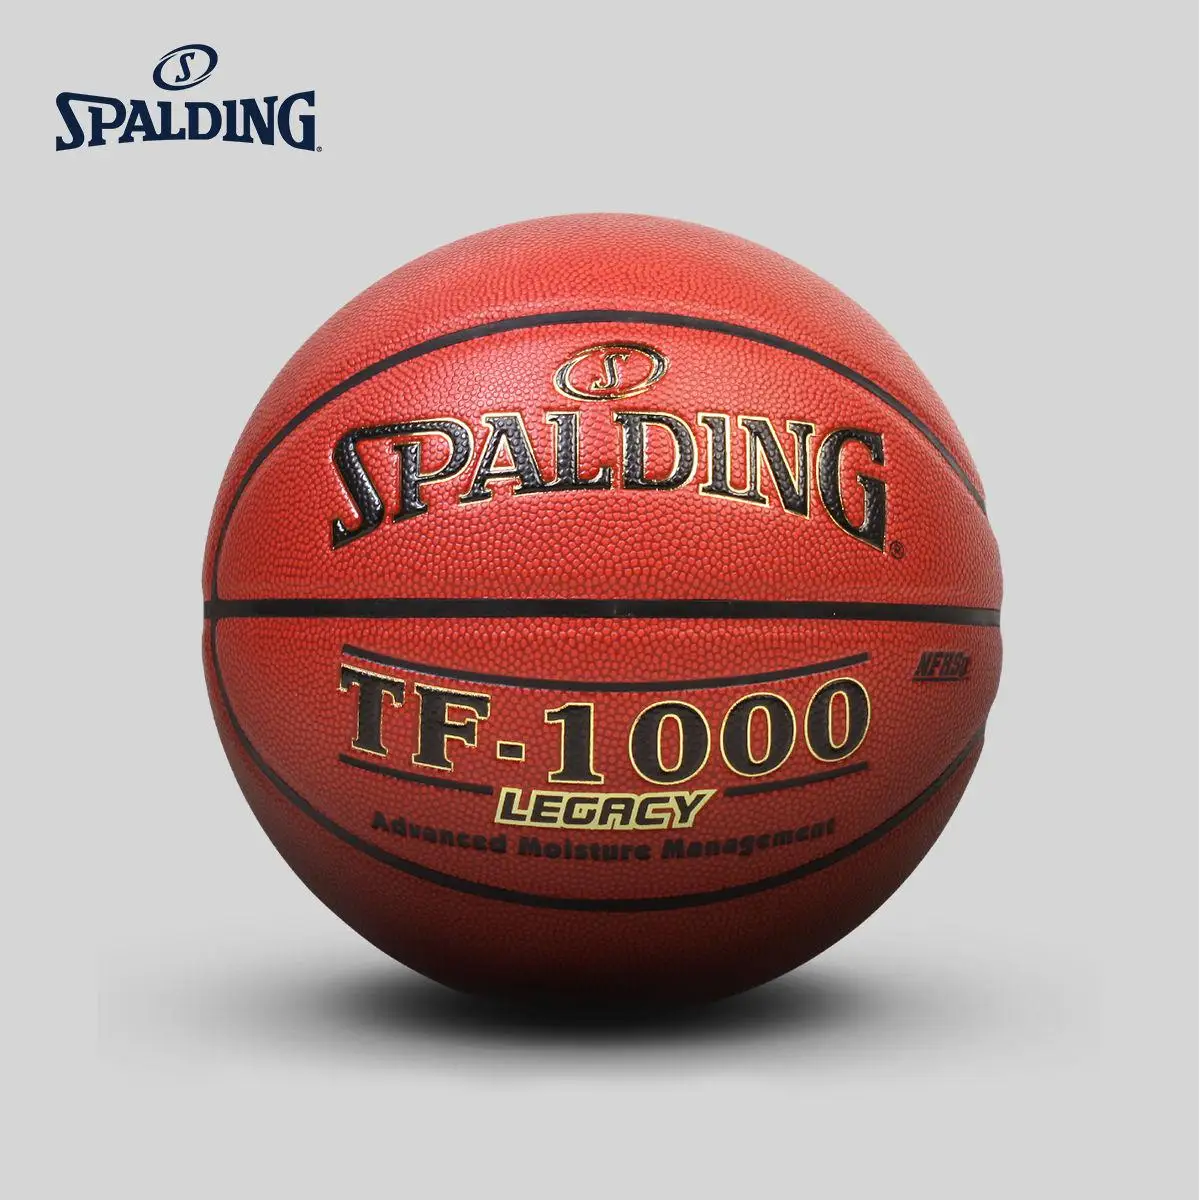 

SPALDING ORIGINAL Legacy series TF-1000 indoor basketball competition high quality men's match ball official size 7 PU 74-716A